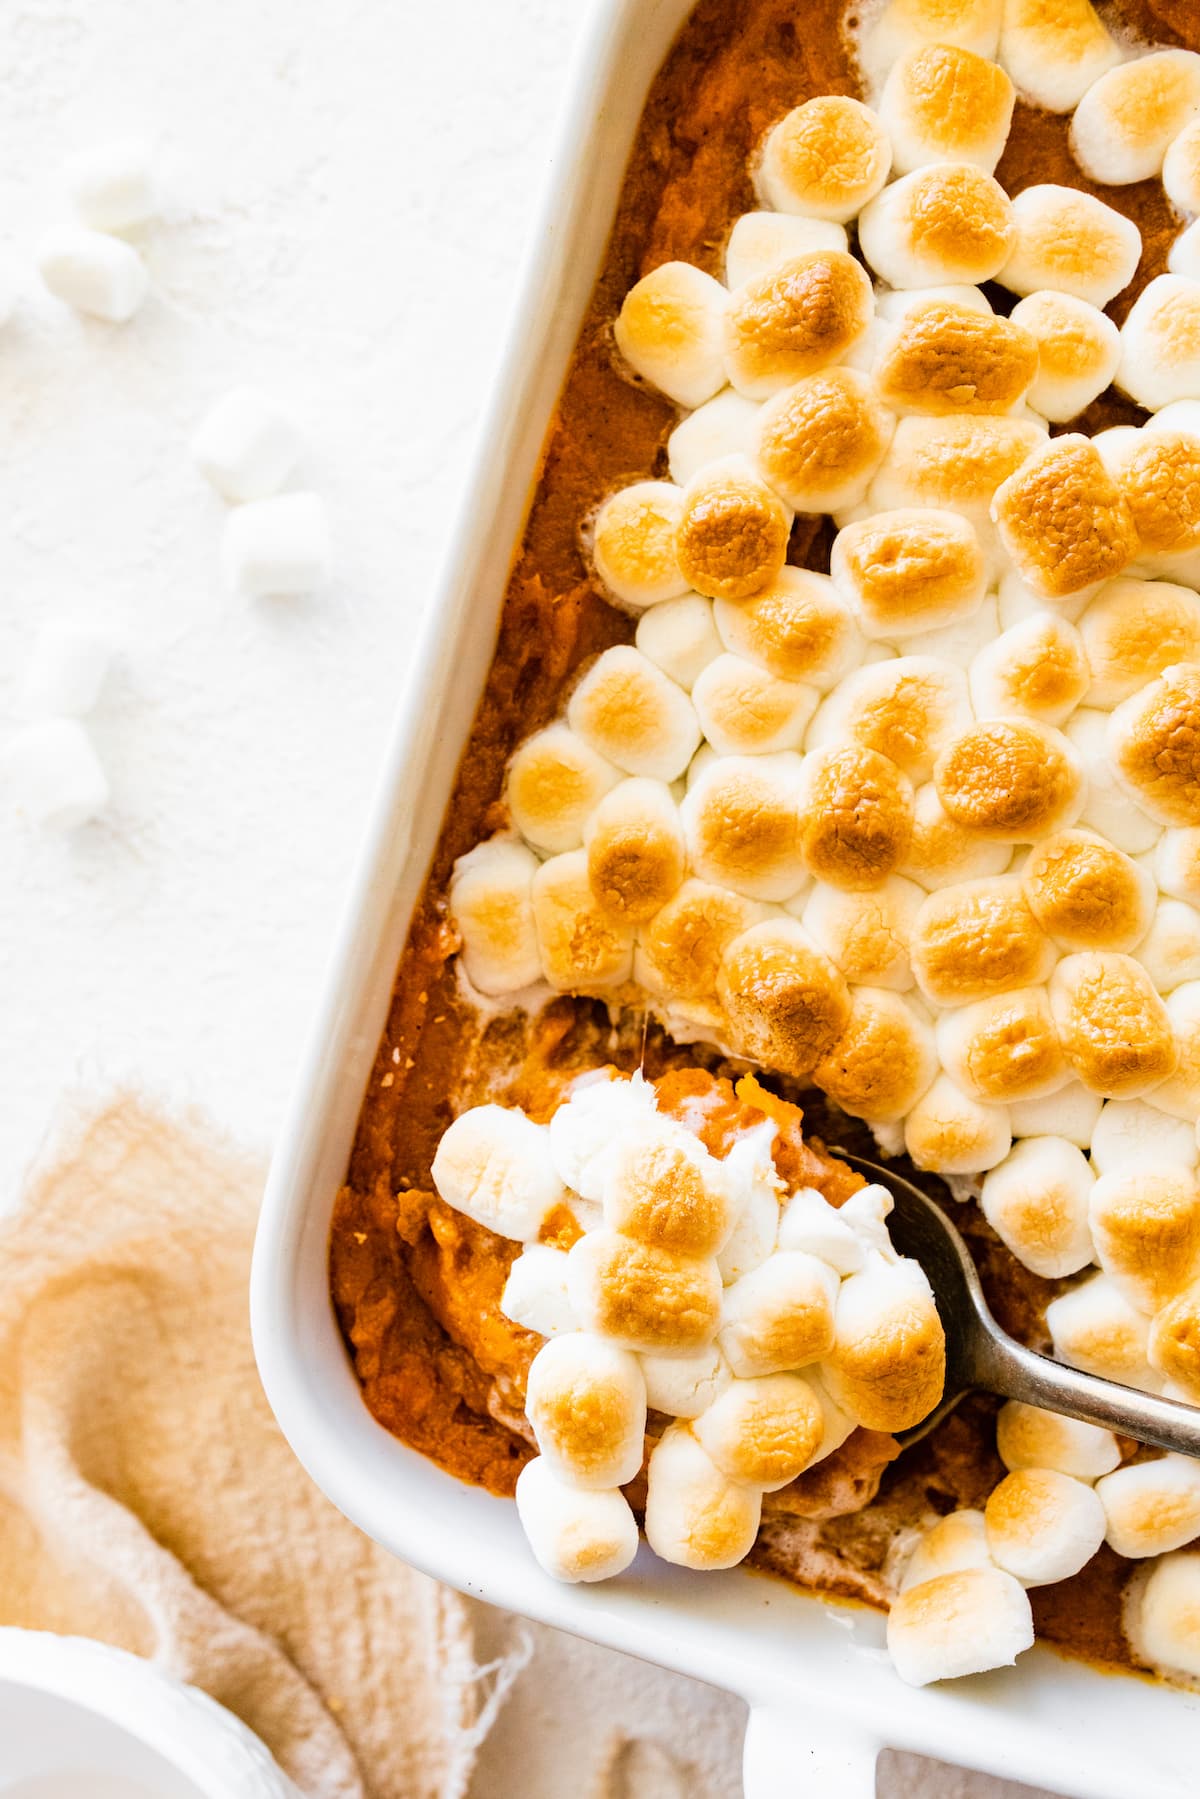 Sweet potato casserole in a square baking dish with a metal spoon removing some of the casserole.